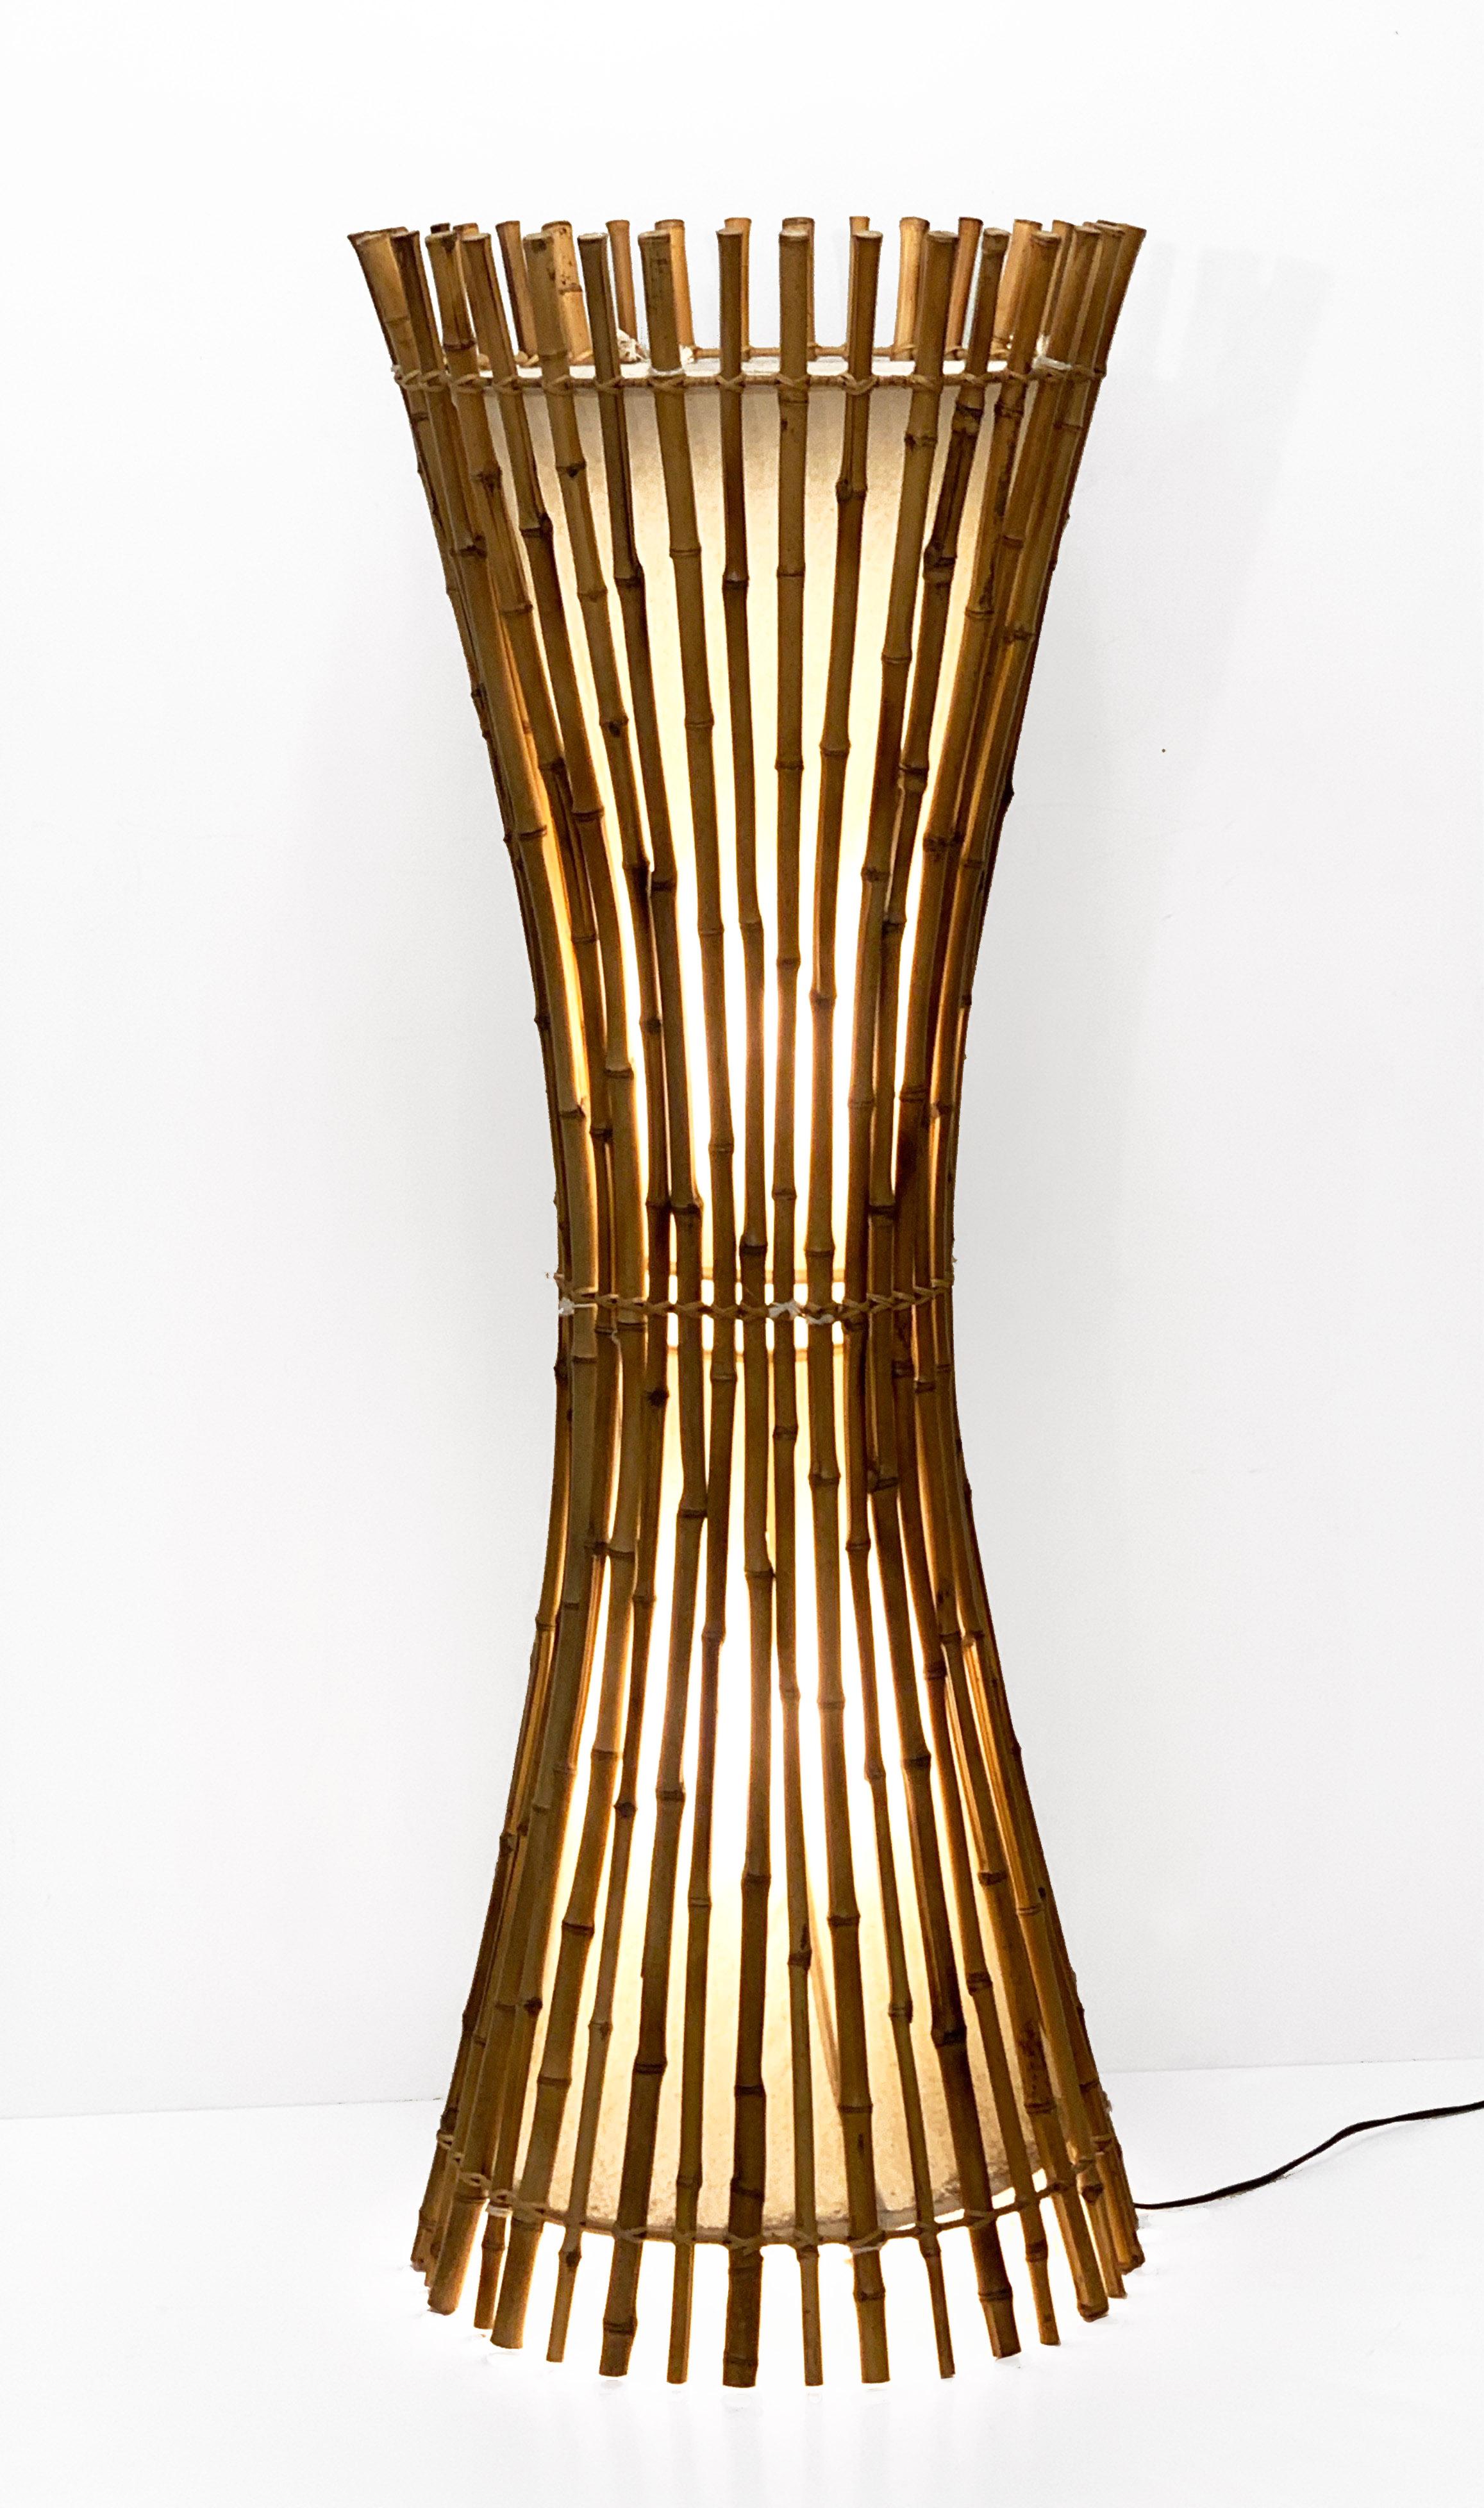 Midcentury Bamboo and Rattan Italian Floor Lamp after Franco Albini, 1960s For Sale 4